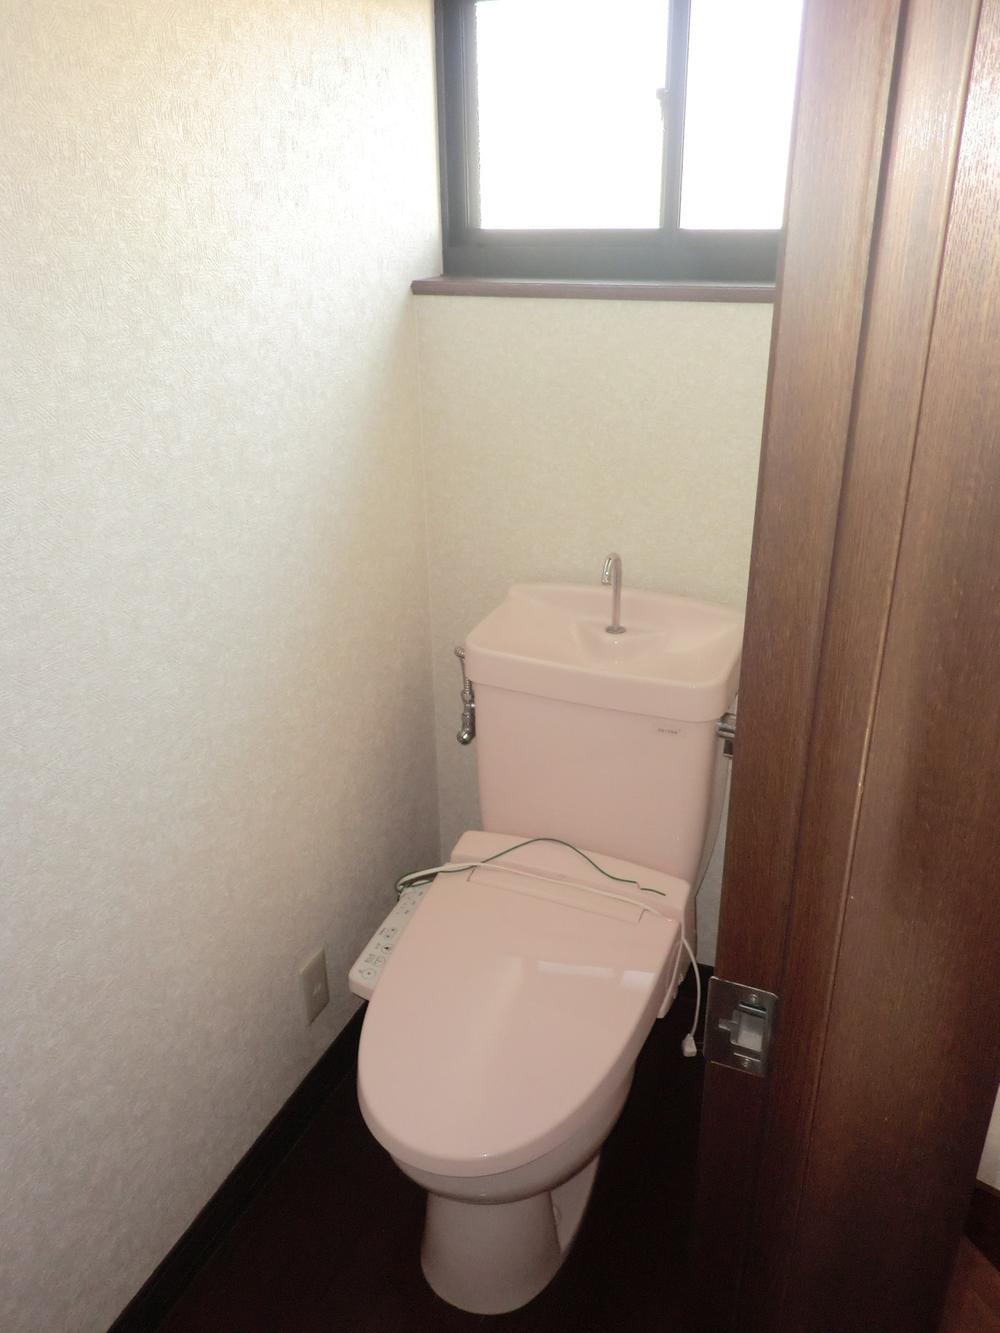 Toilet. It is clean and safe in the exchange already in bidet of new. 